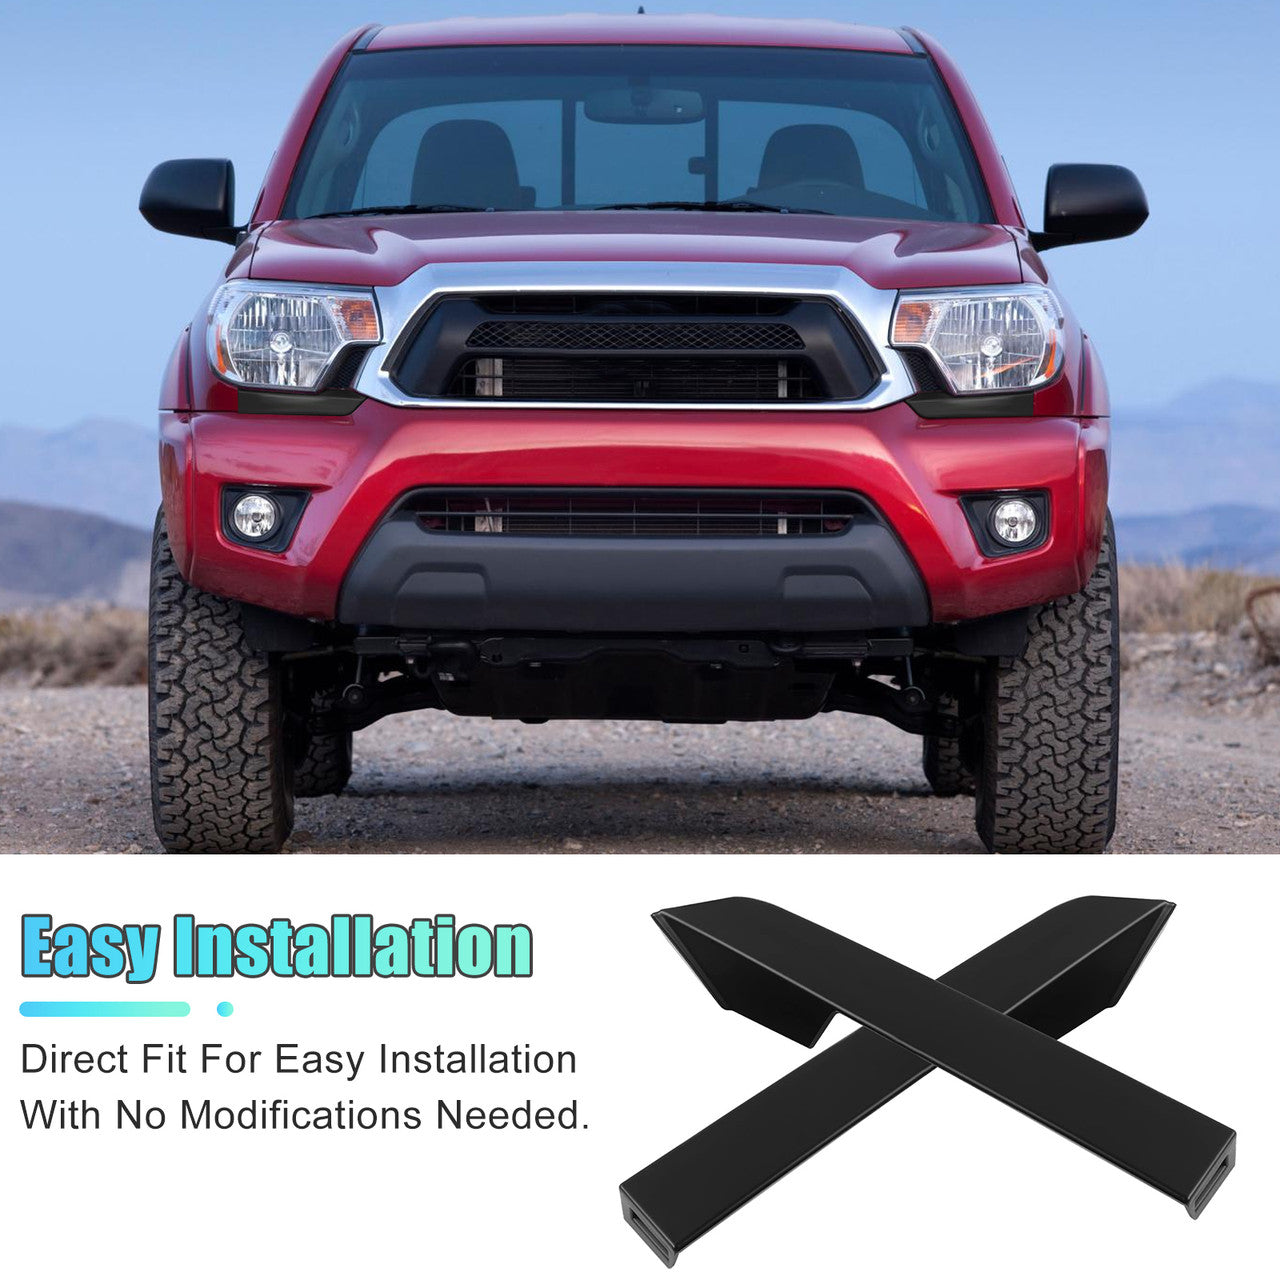 Front Bumper Grille Headlight Filler Trim - Compatible with Toyota Tacoma 2012-2014 (Black)